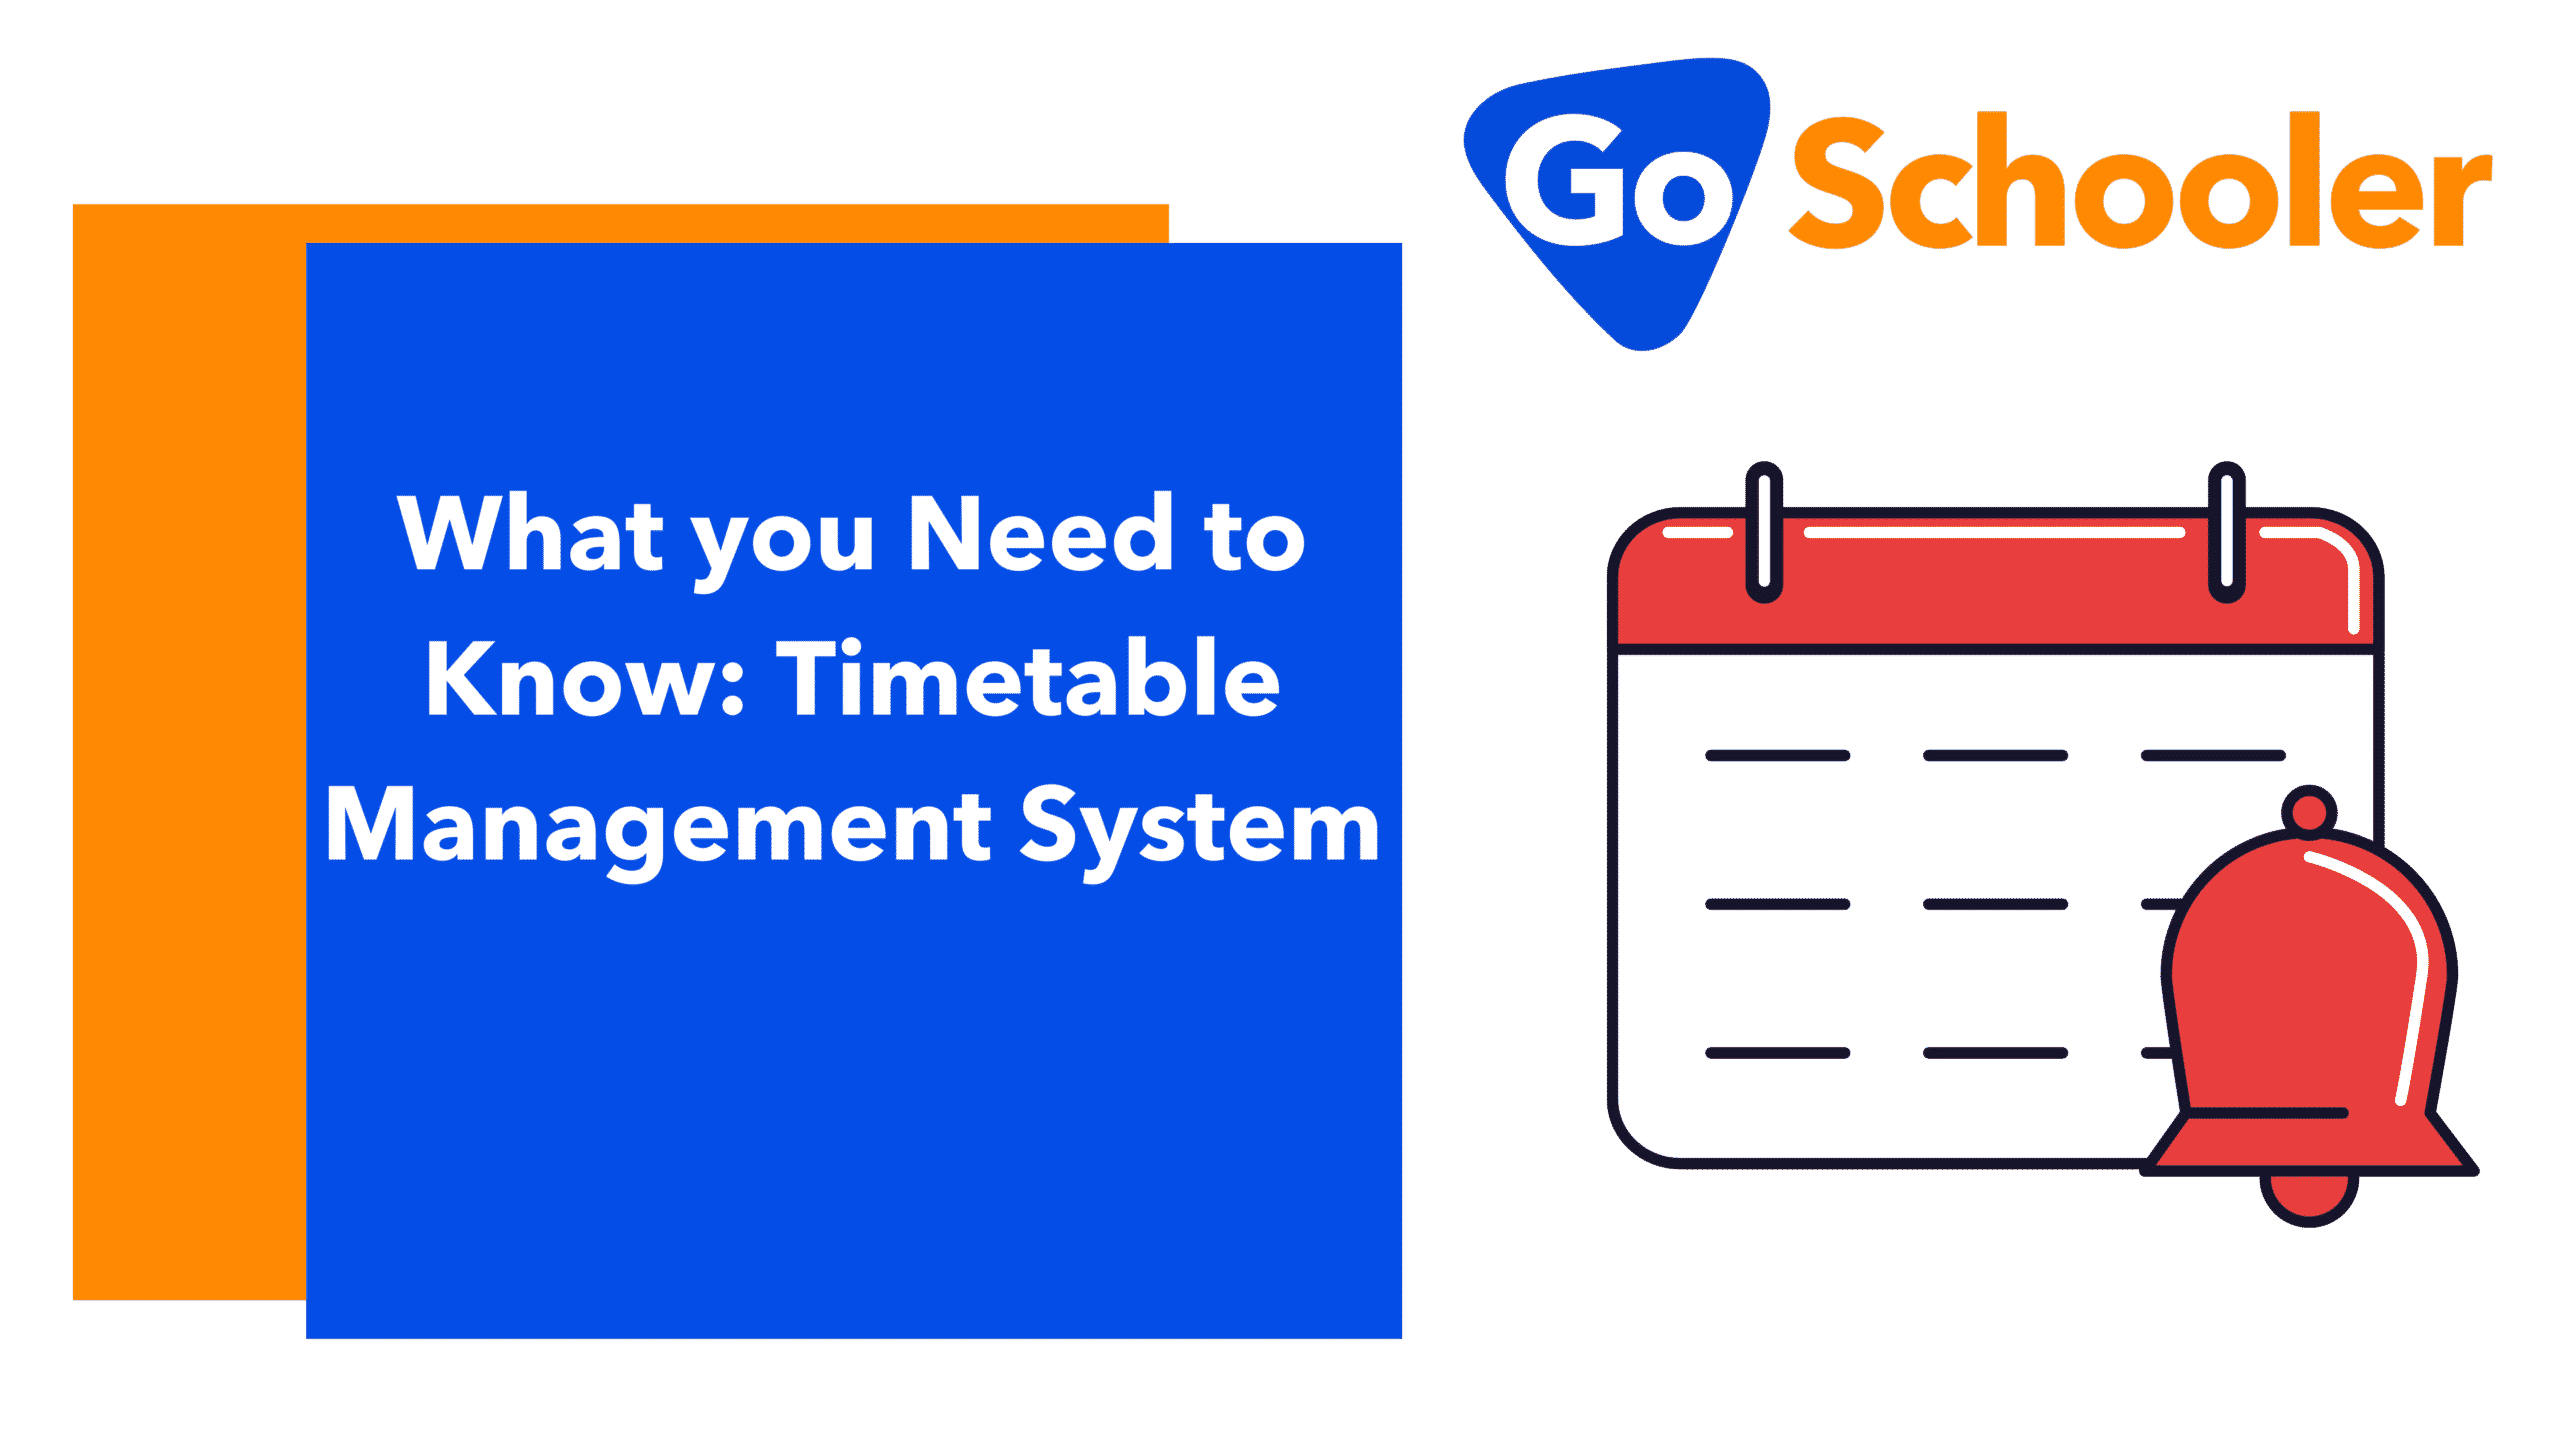 Timetable Management System